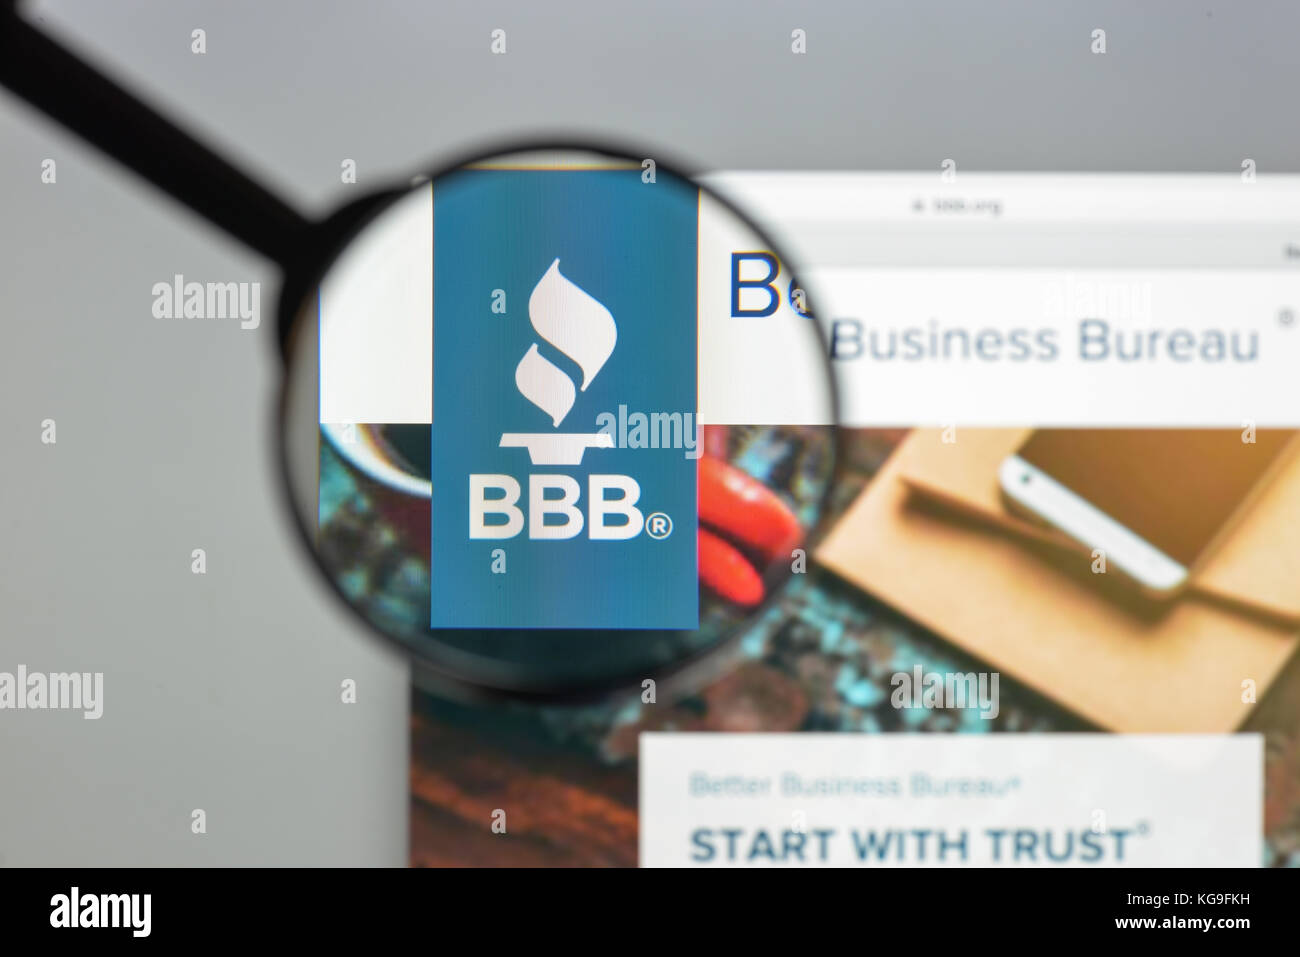 Milan, Italy - August 10, 2017: BBB website homepage. It is a nonprofit organization focused on advancing marketplace trust. Bbb logo visible. Stock Photo